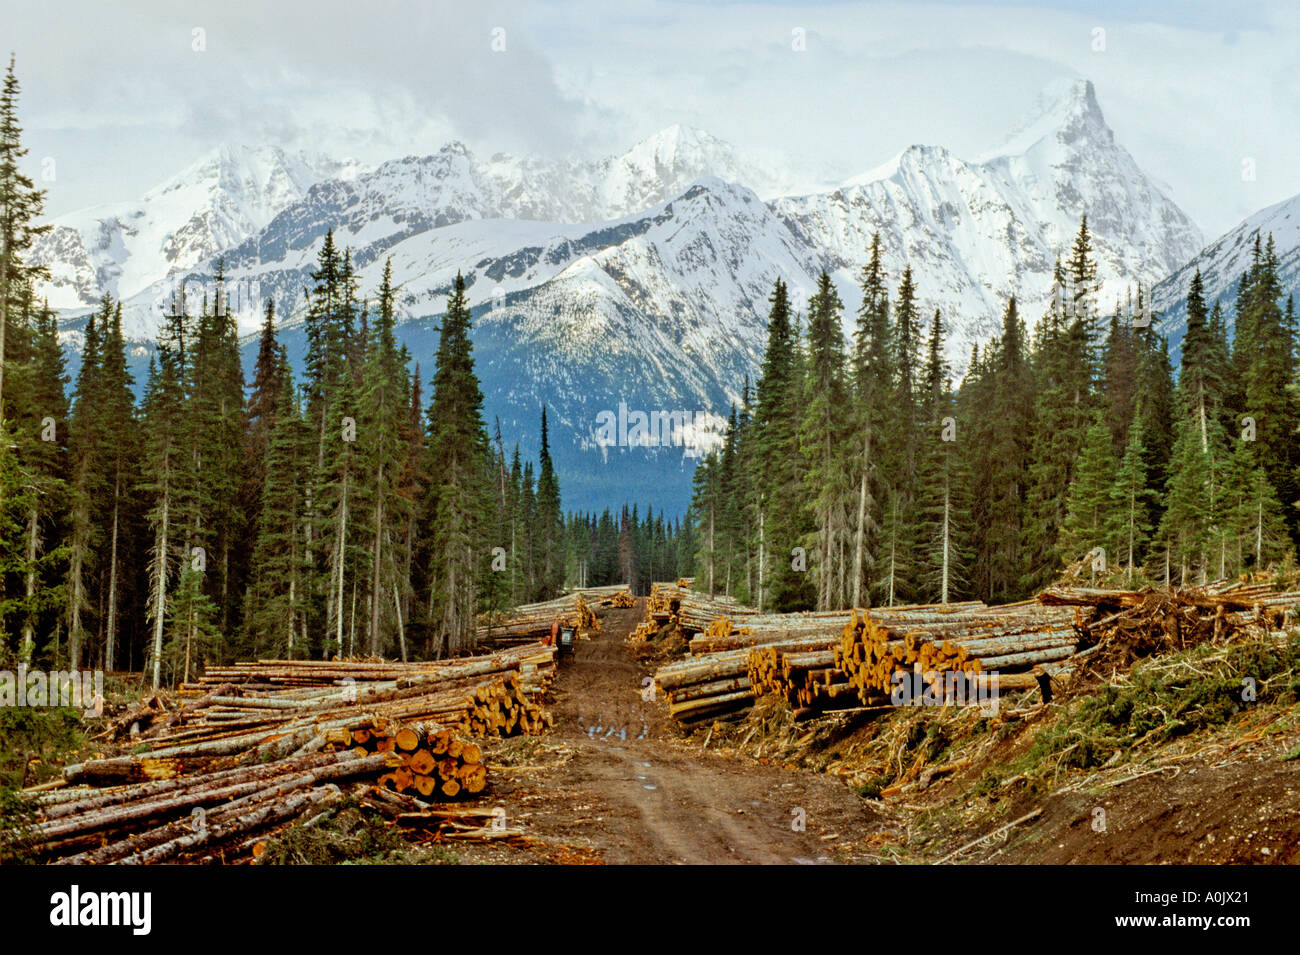 Logging Road to the mountains Stock Photo